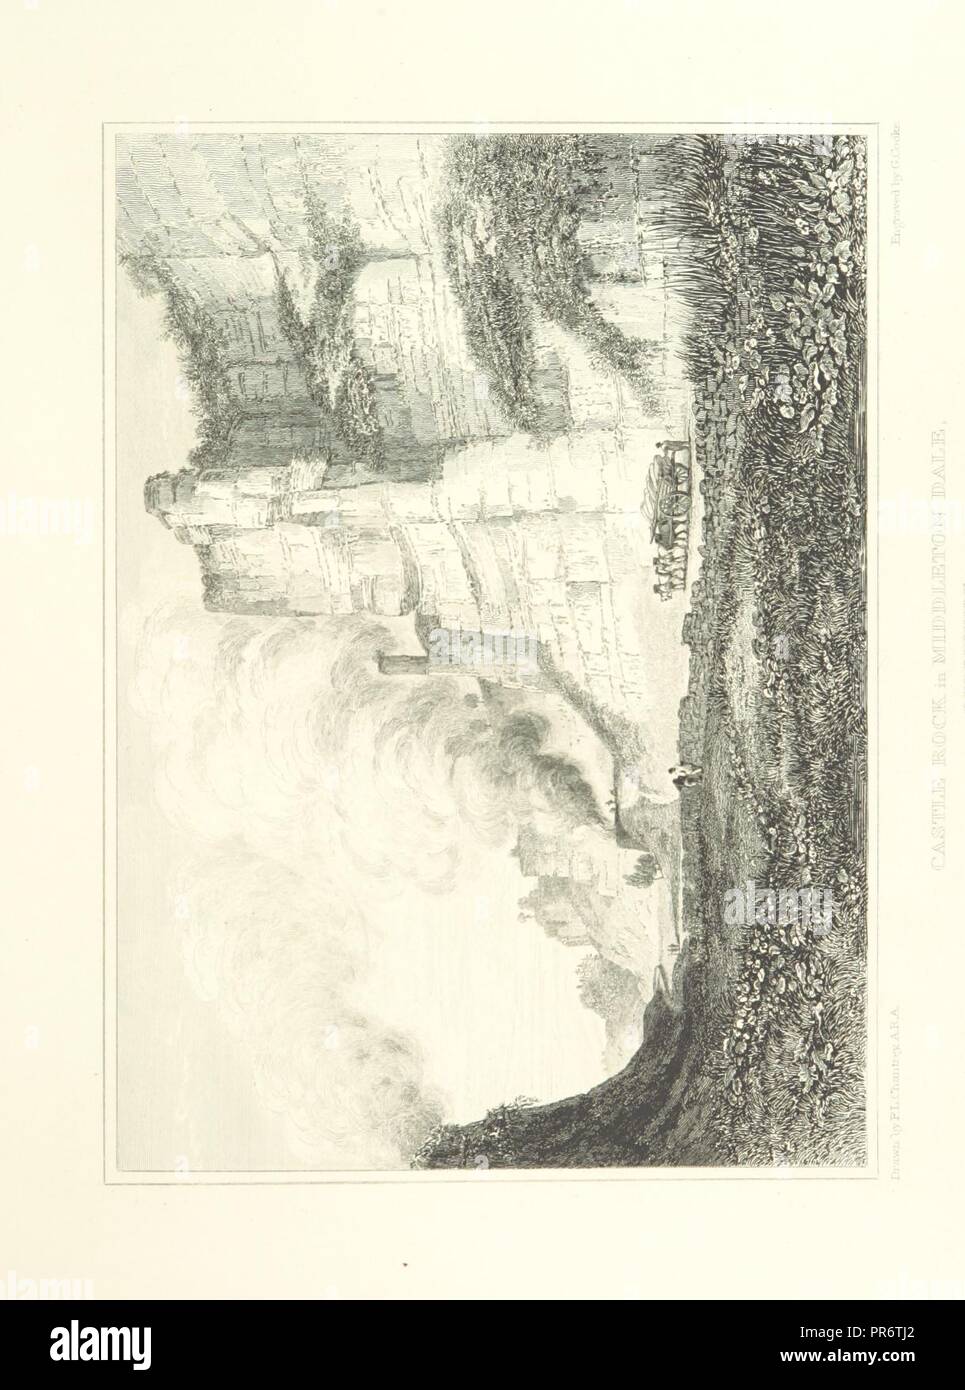 page 39 of 'Chantrey's Peak Scenery or Views in Derbyshire. Engraved by W. B. and George Cooke after drawings by Sir F. L. Chantrey, R. A. With historical and topographical descriptions by James Croston' by The Br0071. Stock Photo